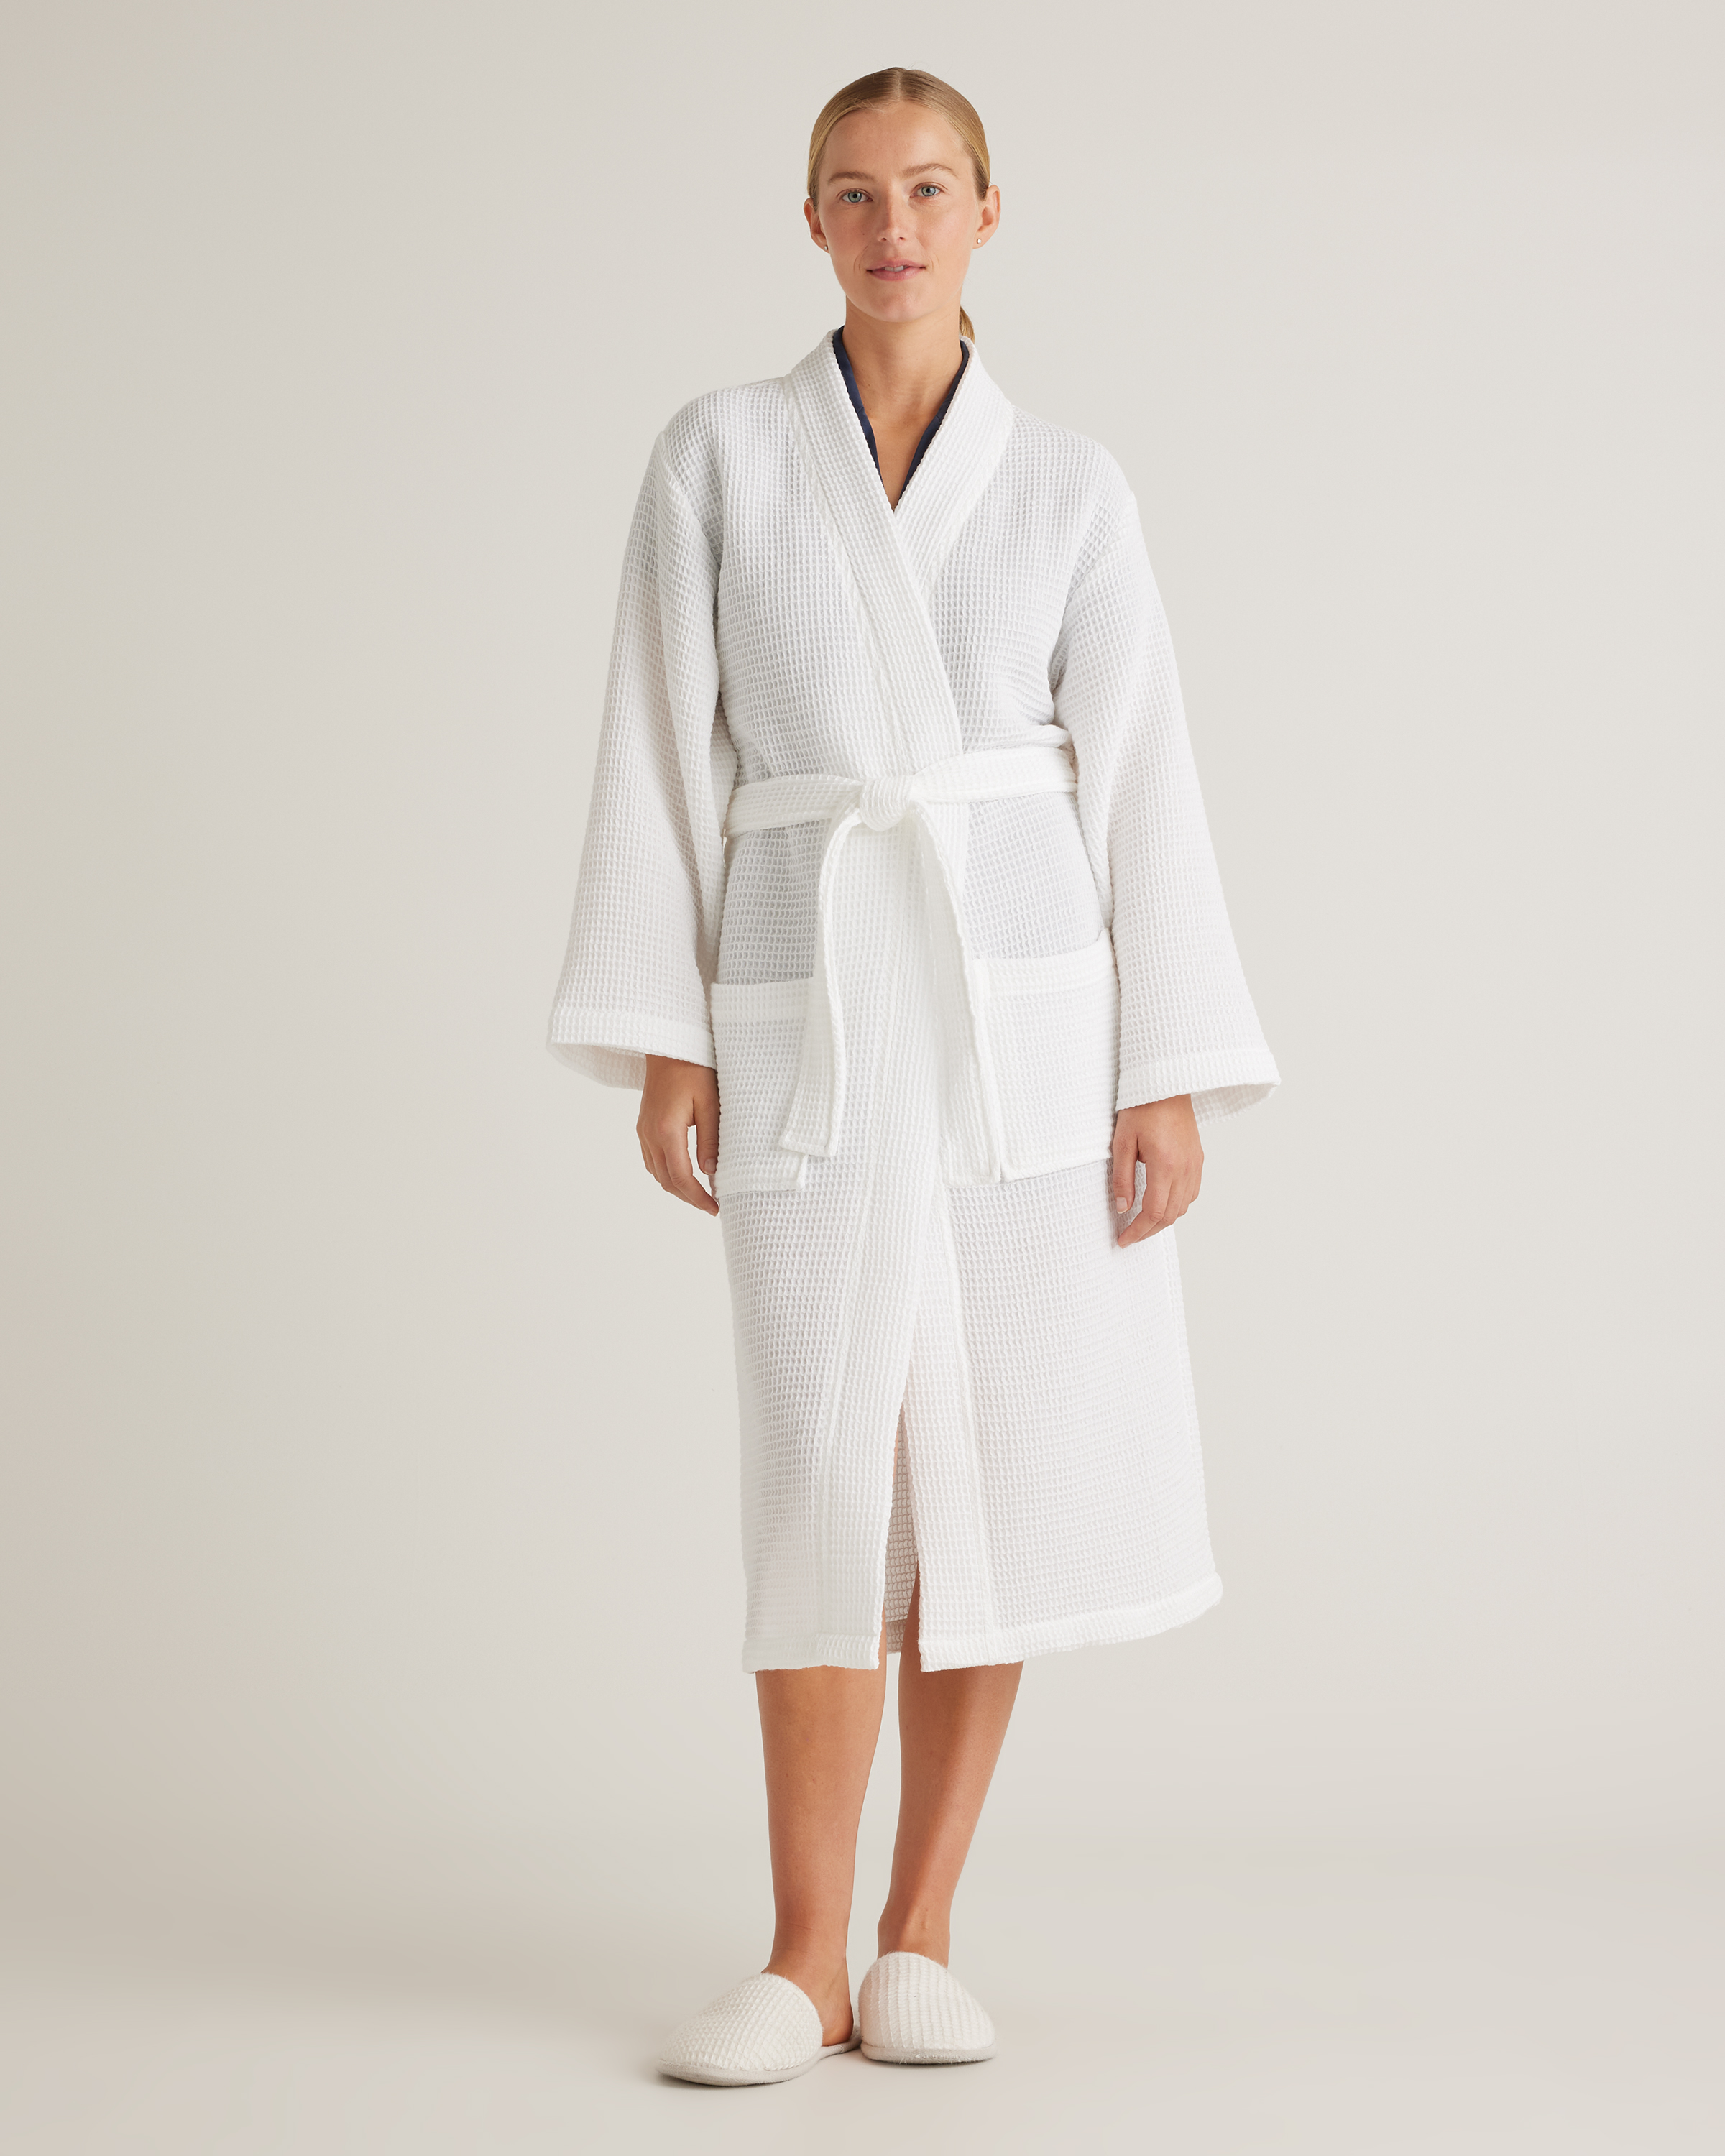 Premium 2in1 'Waffle Outer' 'Towelling Inner' 100% Cotton Dressing Gowns -  Hooded - The Towel Shop